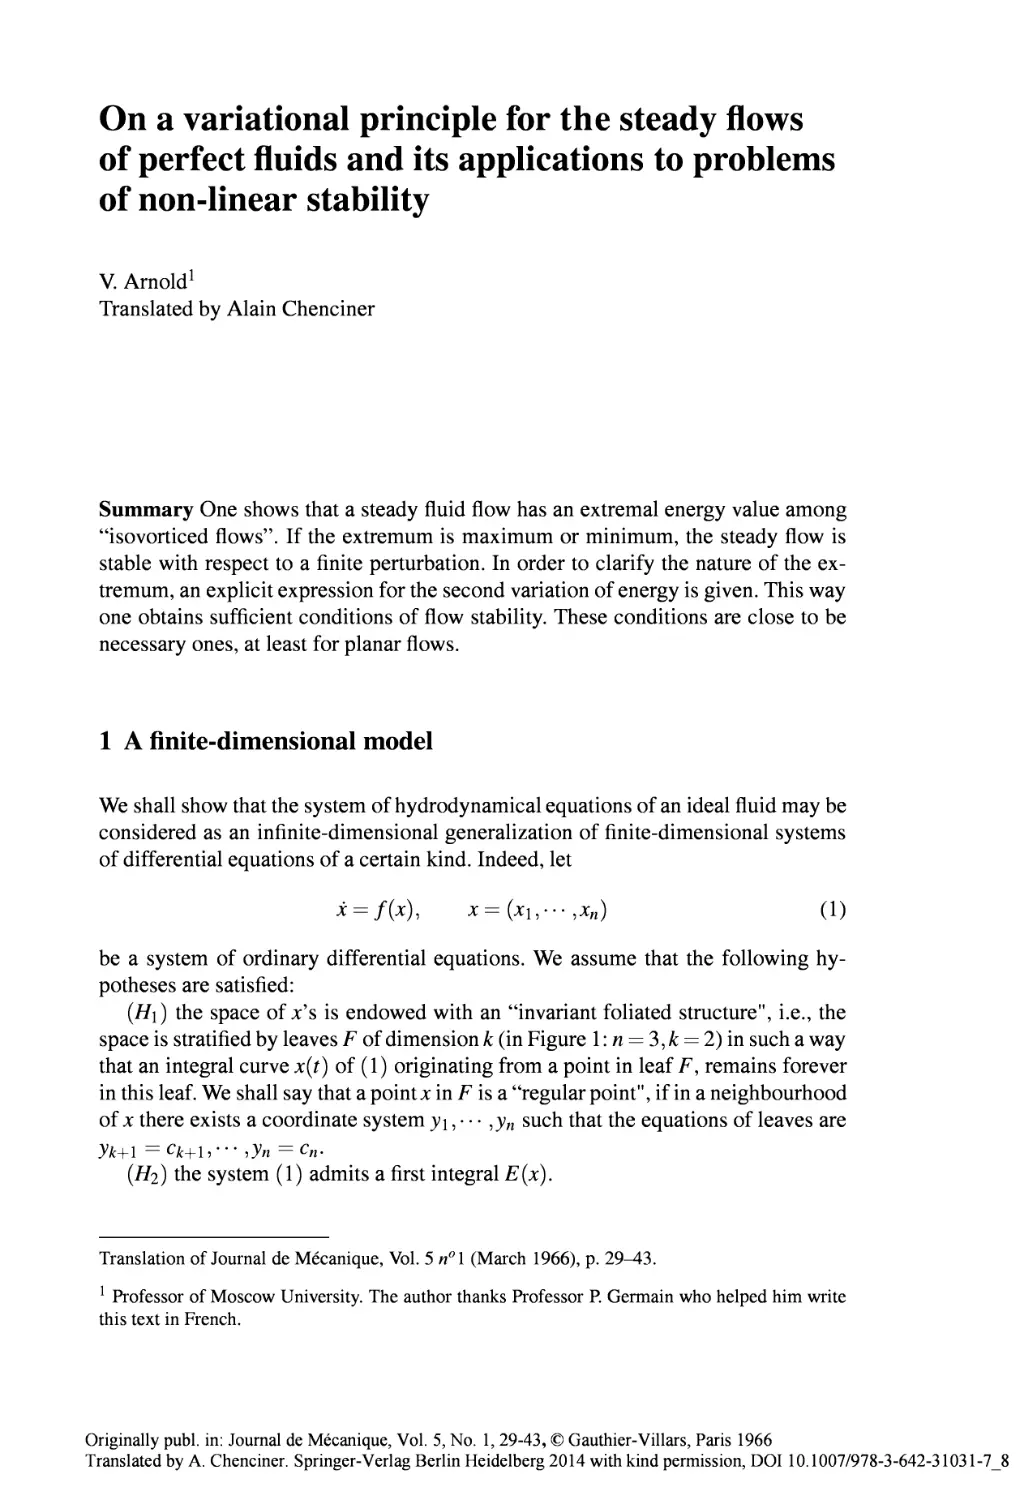 8 On a variational principle for the steady flows of perfect fluids and its applications to problems of non-linear stability